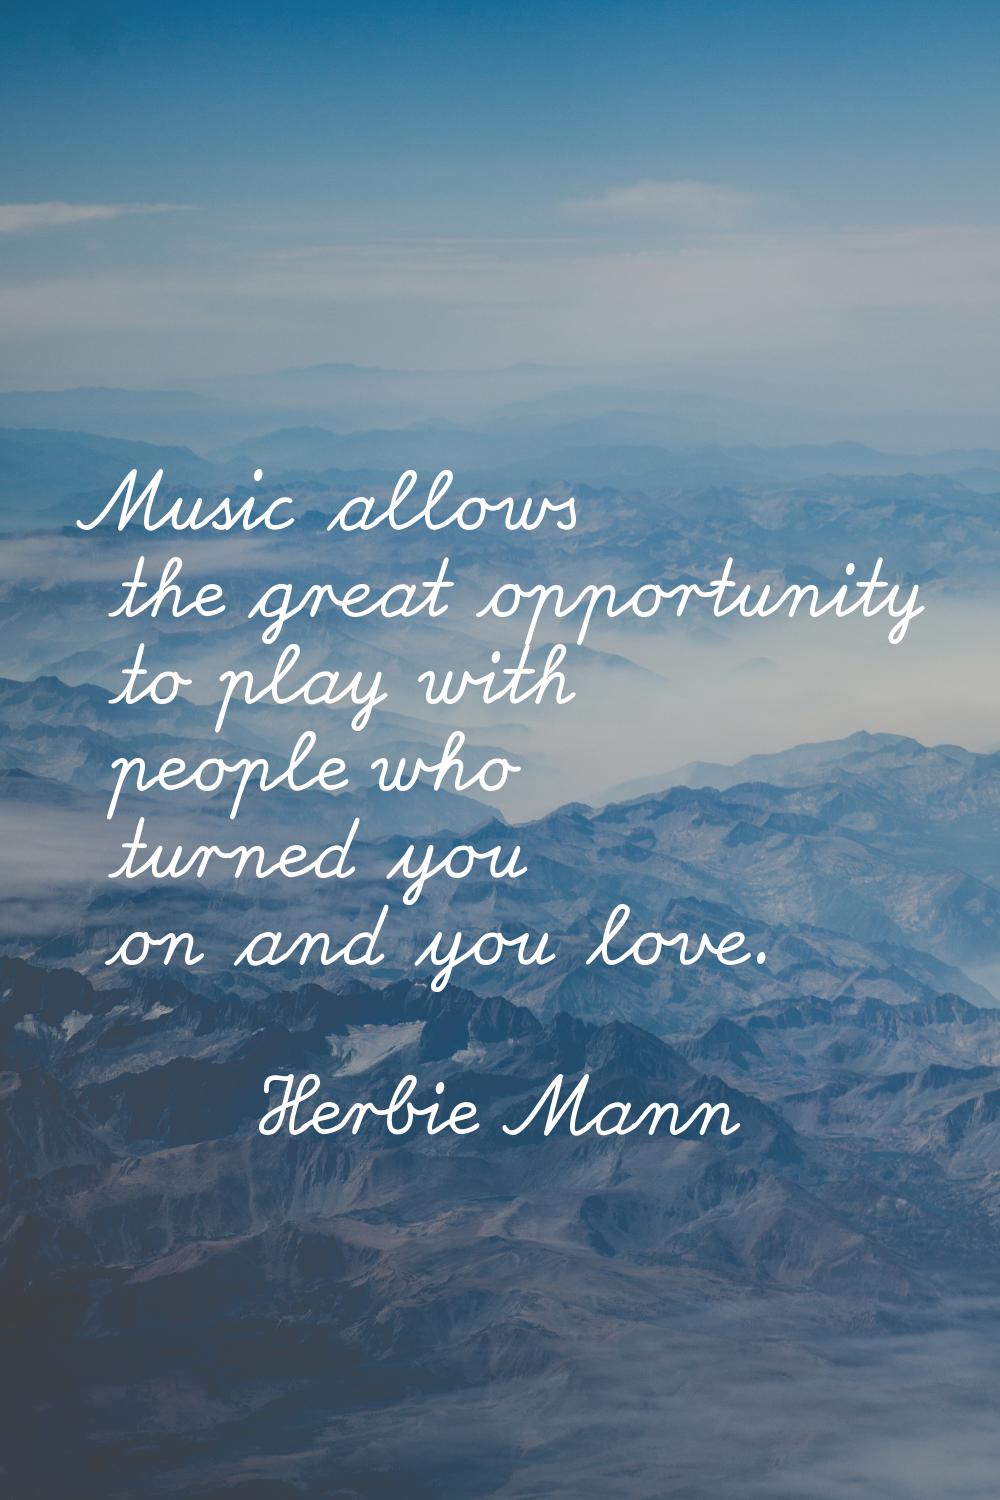 Music allows the great opportunity to play with people who turned you on and you love.